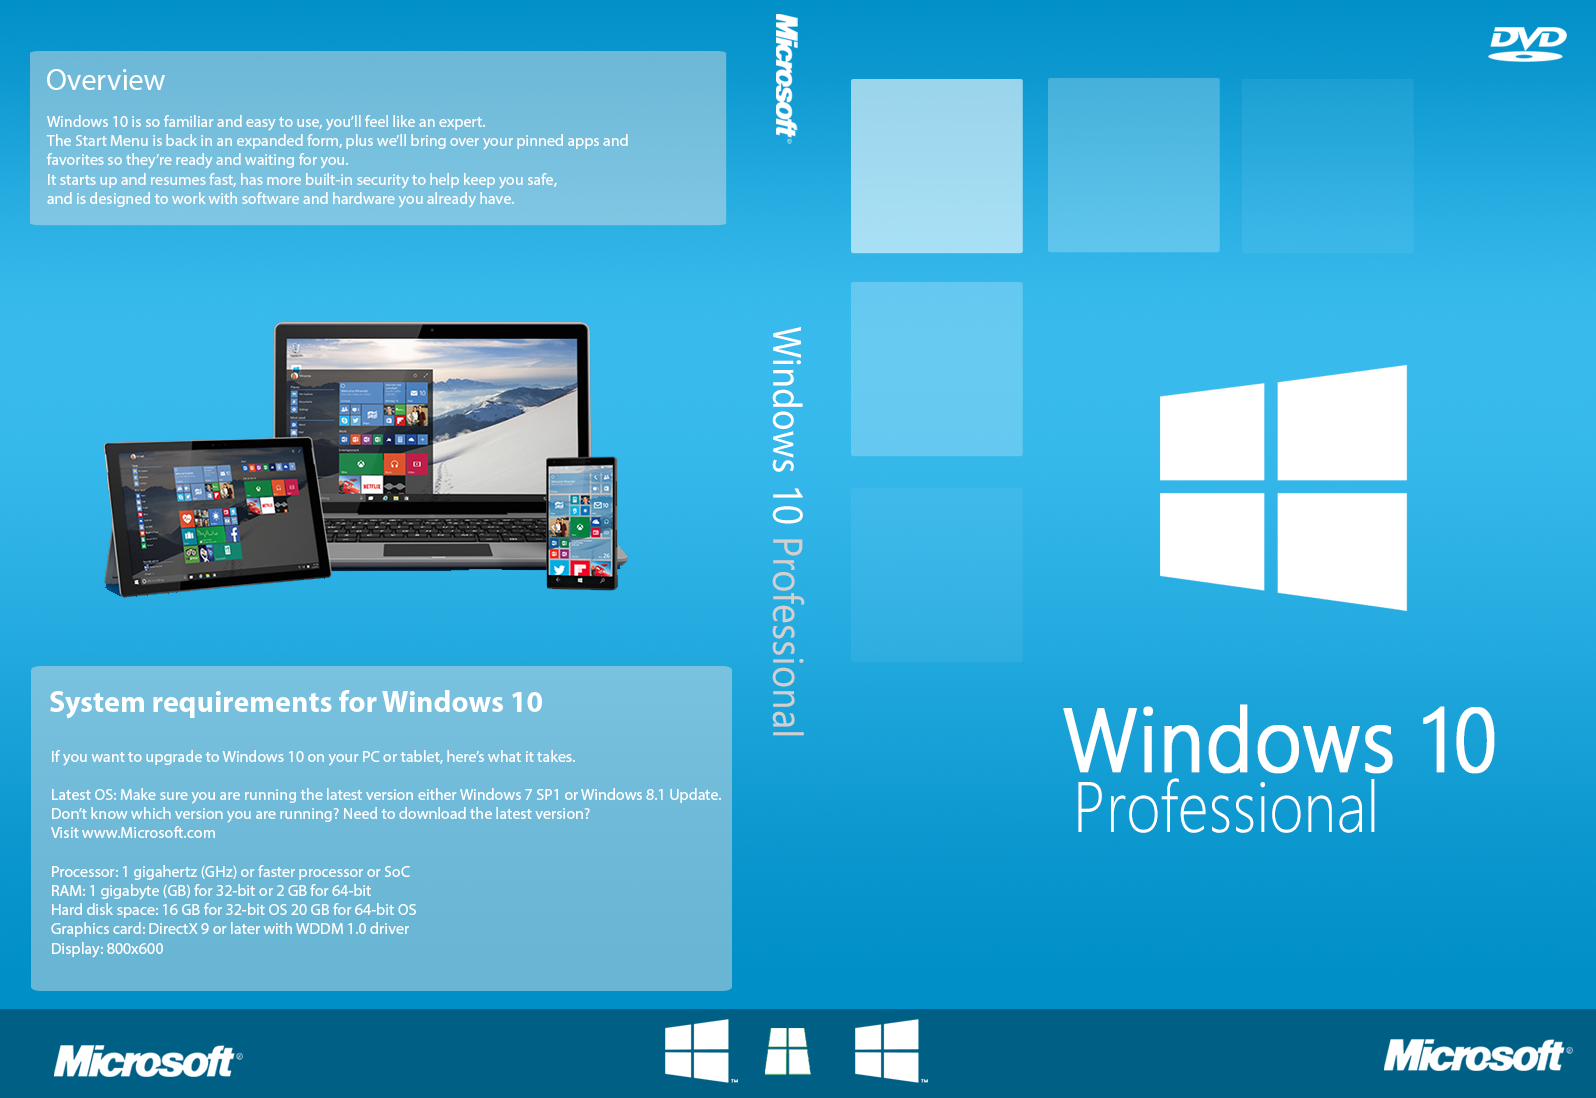 Windows 10 Cover - Professional (dvd cover) by joostiphone on DeviantArt